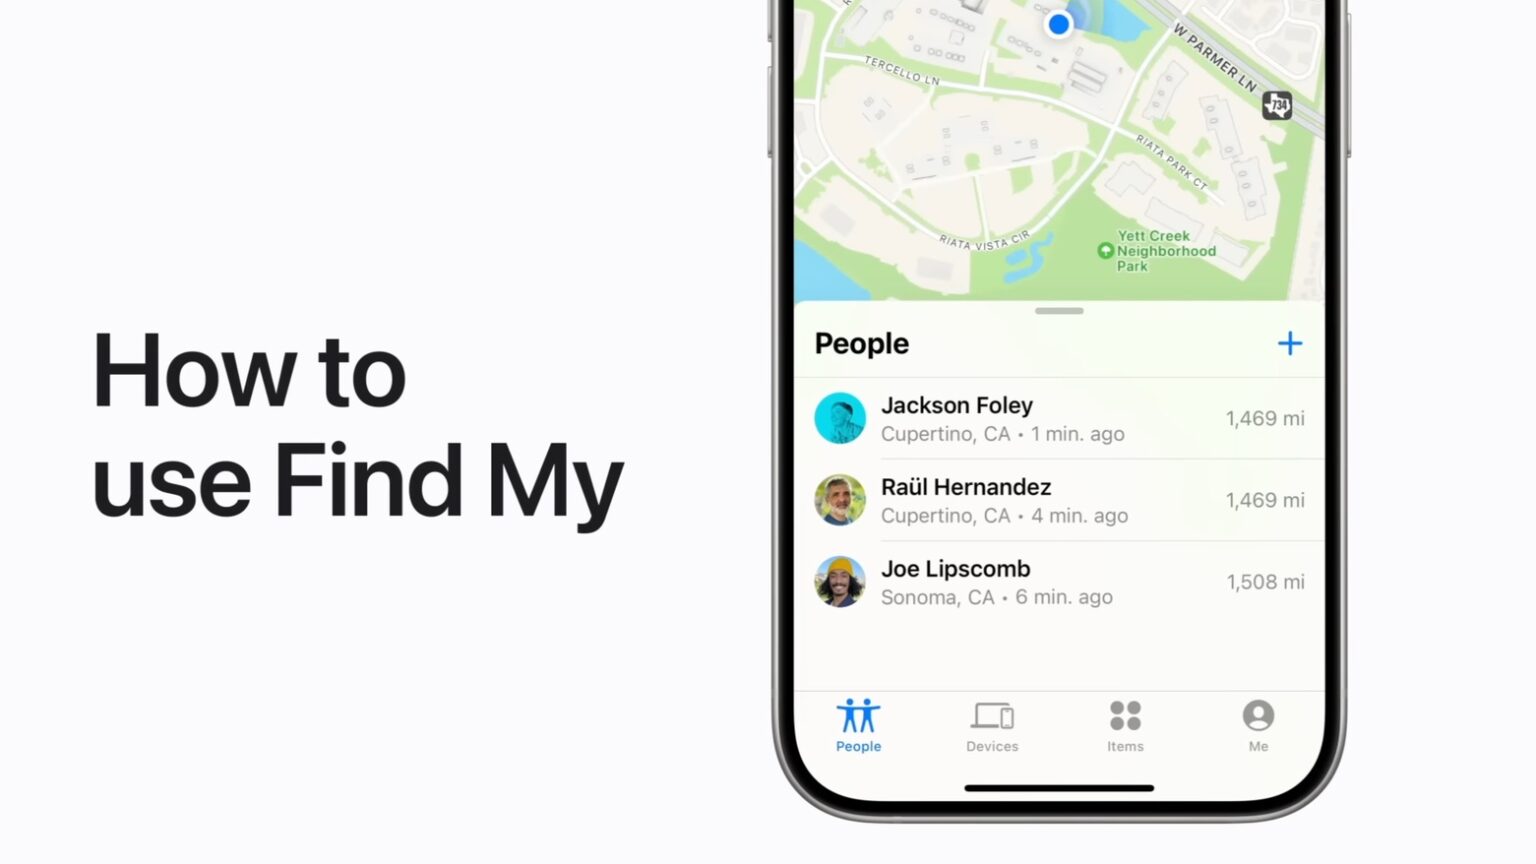 Apple video demos how to use Find My to locate your gadgets